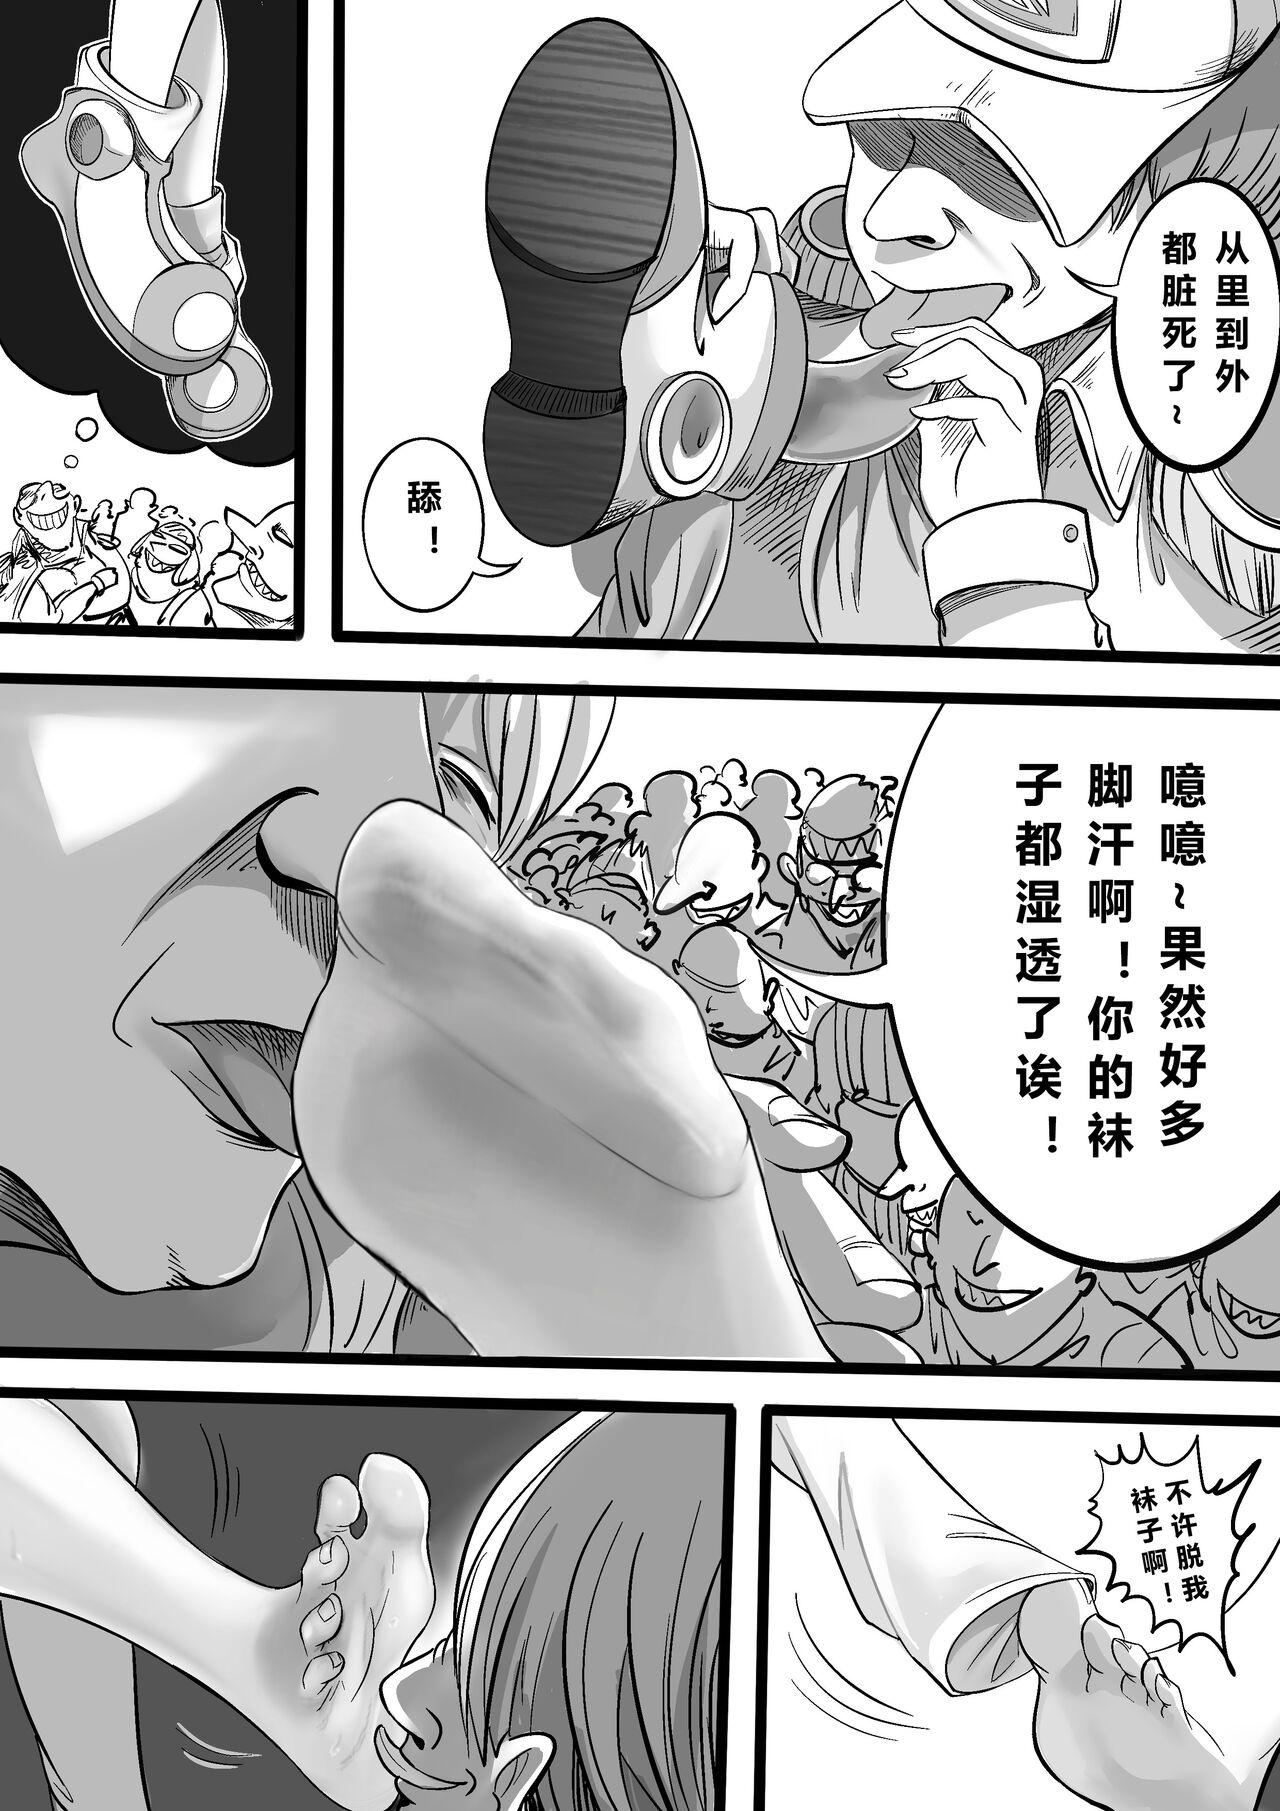 Hot Girl ONE PIECE 歌之魔女的监禁篇 - One piece Bj - Page 5